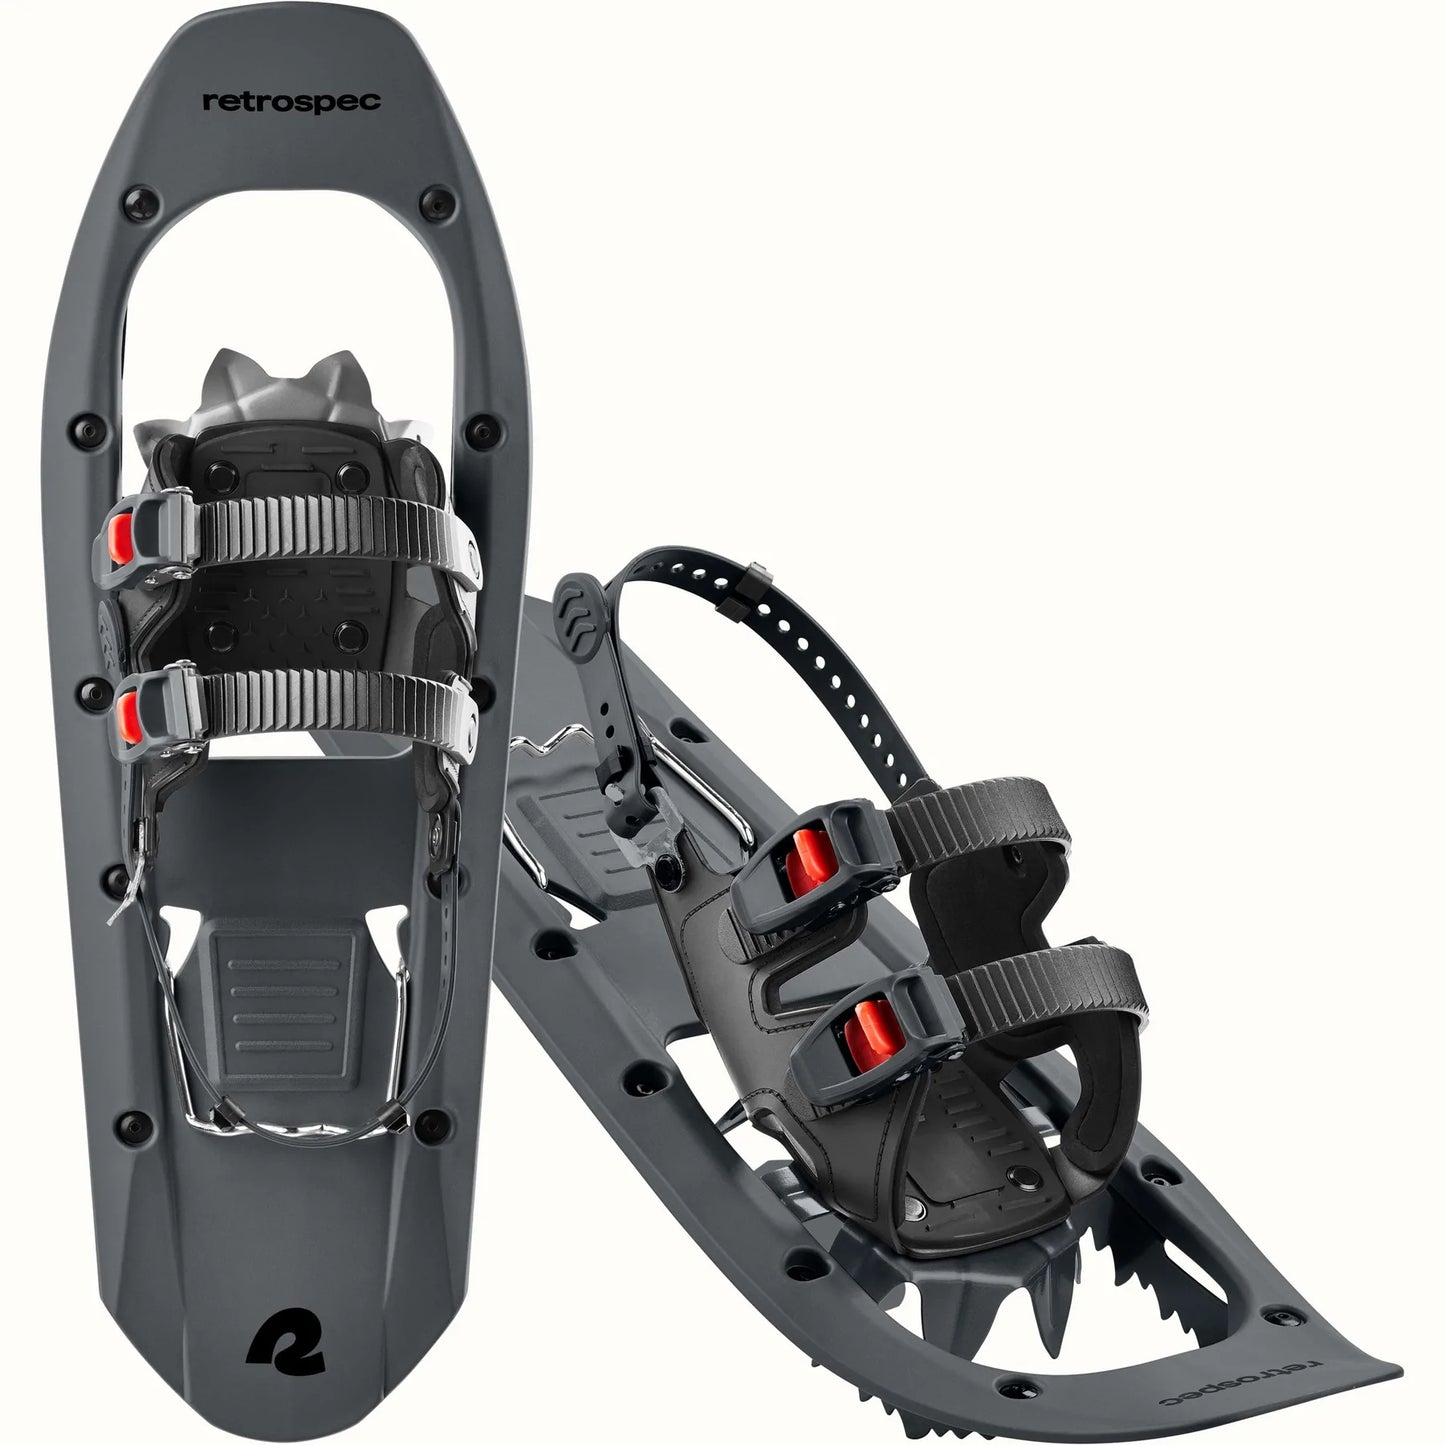 Retrospec Drifter Plus -25 In Snowshoes, 25" (Up to 250 Lbs)